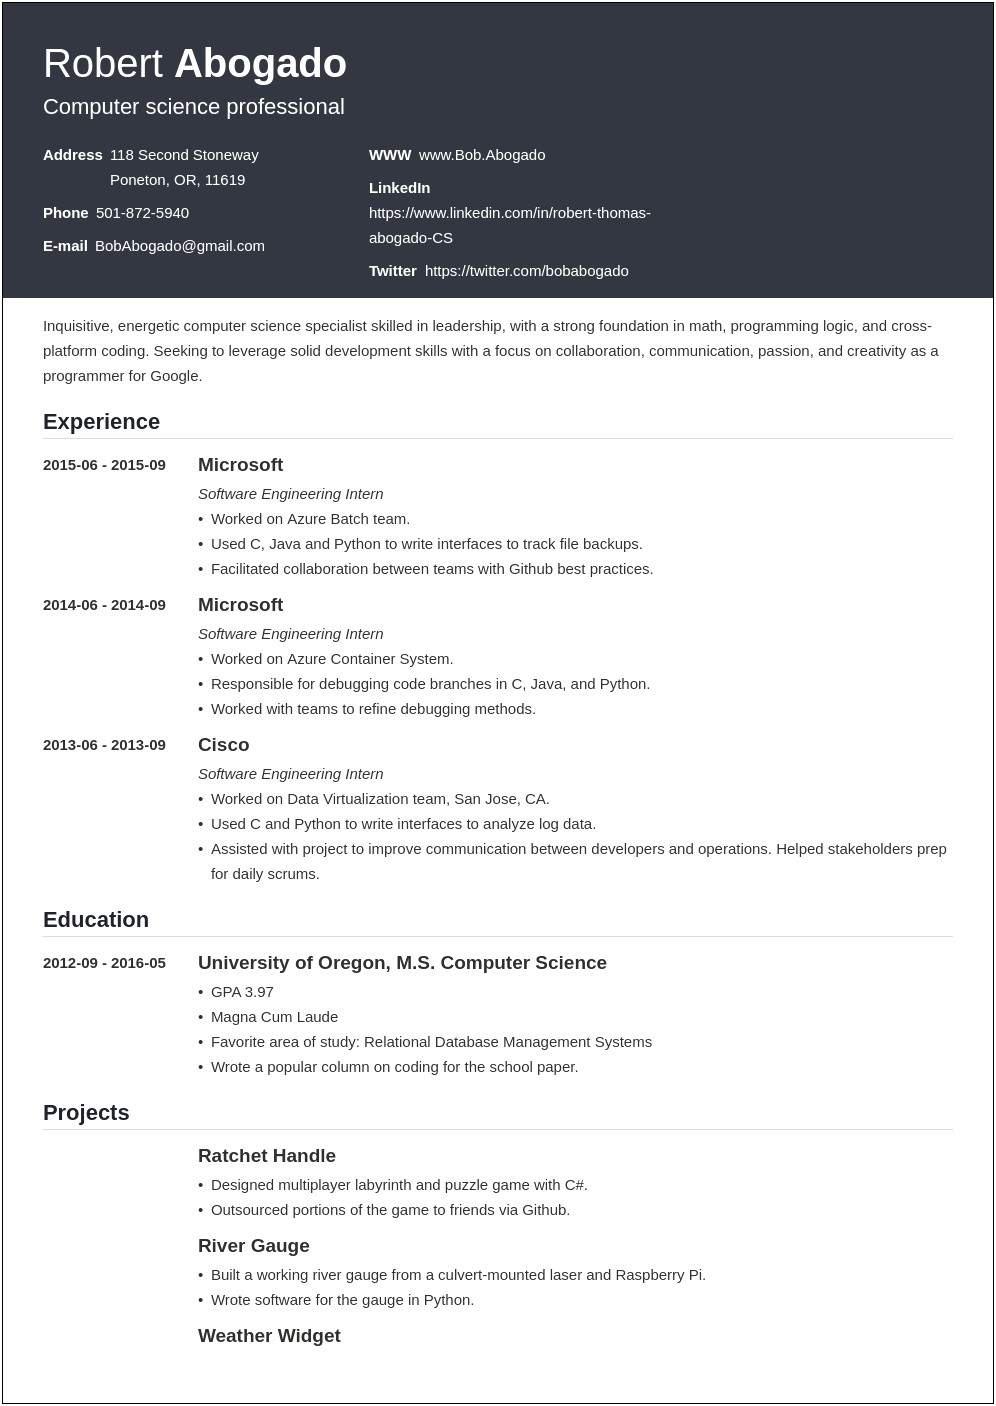 Resume Objective For Computer Job